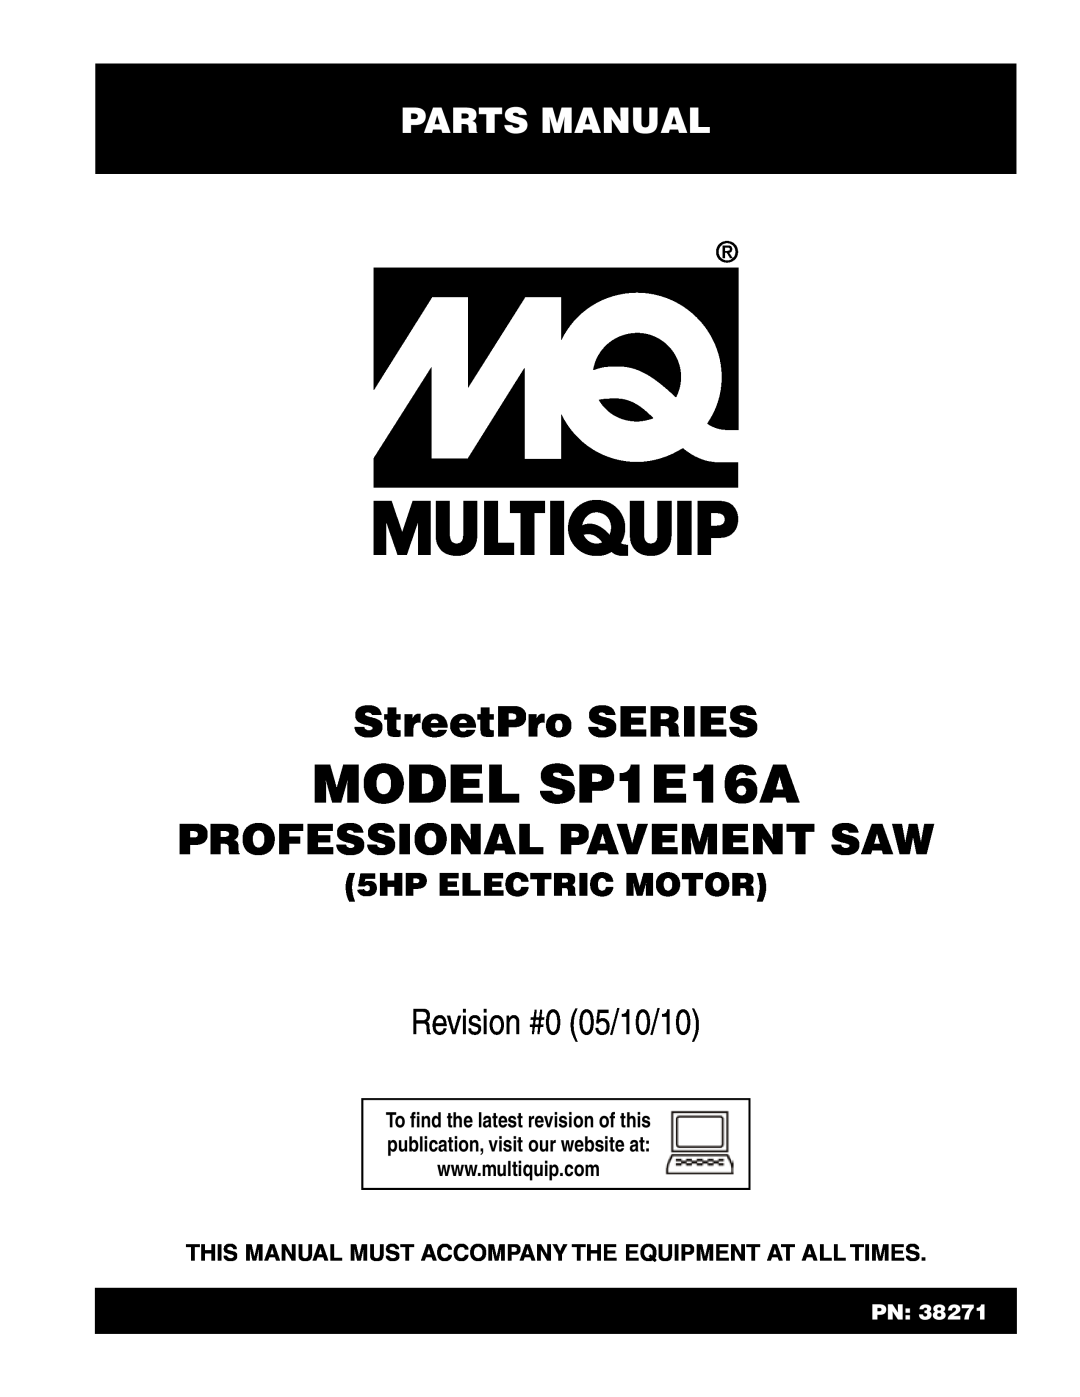 Multiquip SP1E16A operation manual This Manual Must Accompany The Equipment At All Times, MODEL sp1e16a, StreetPro SERIES 